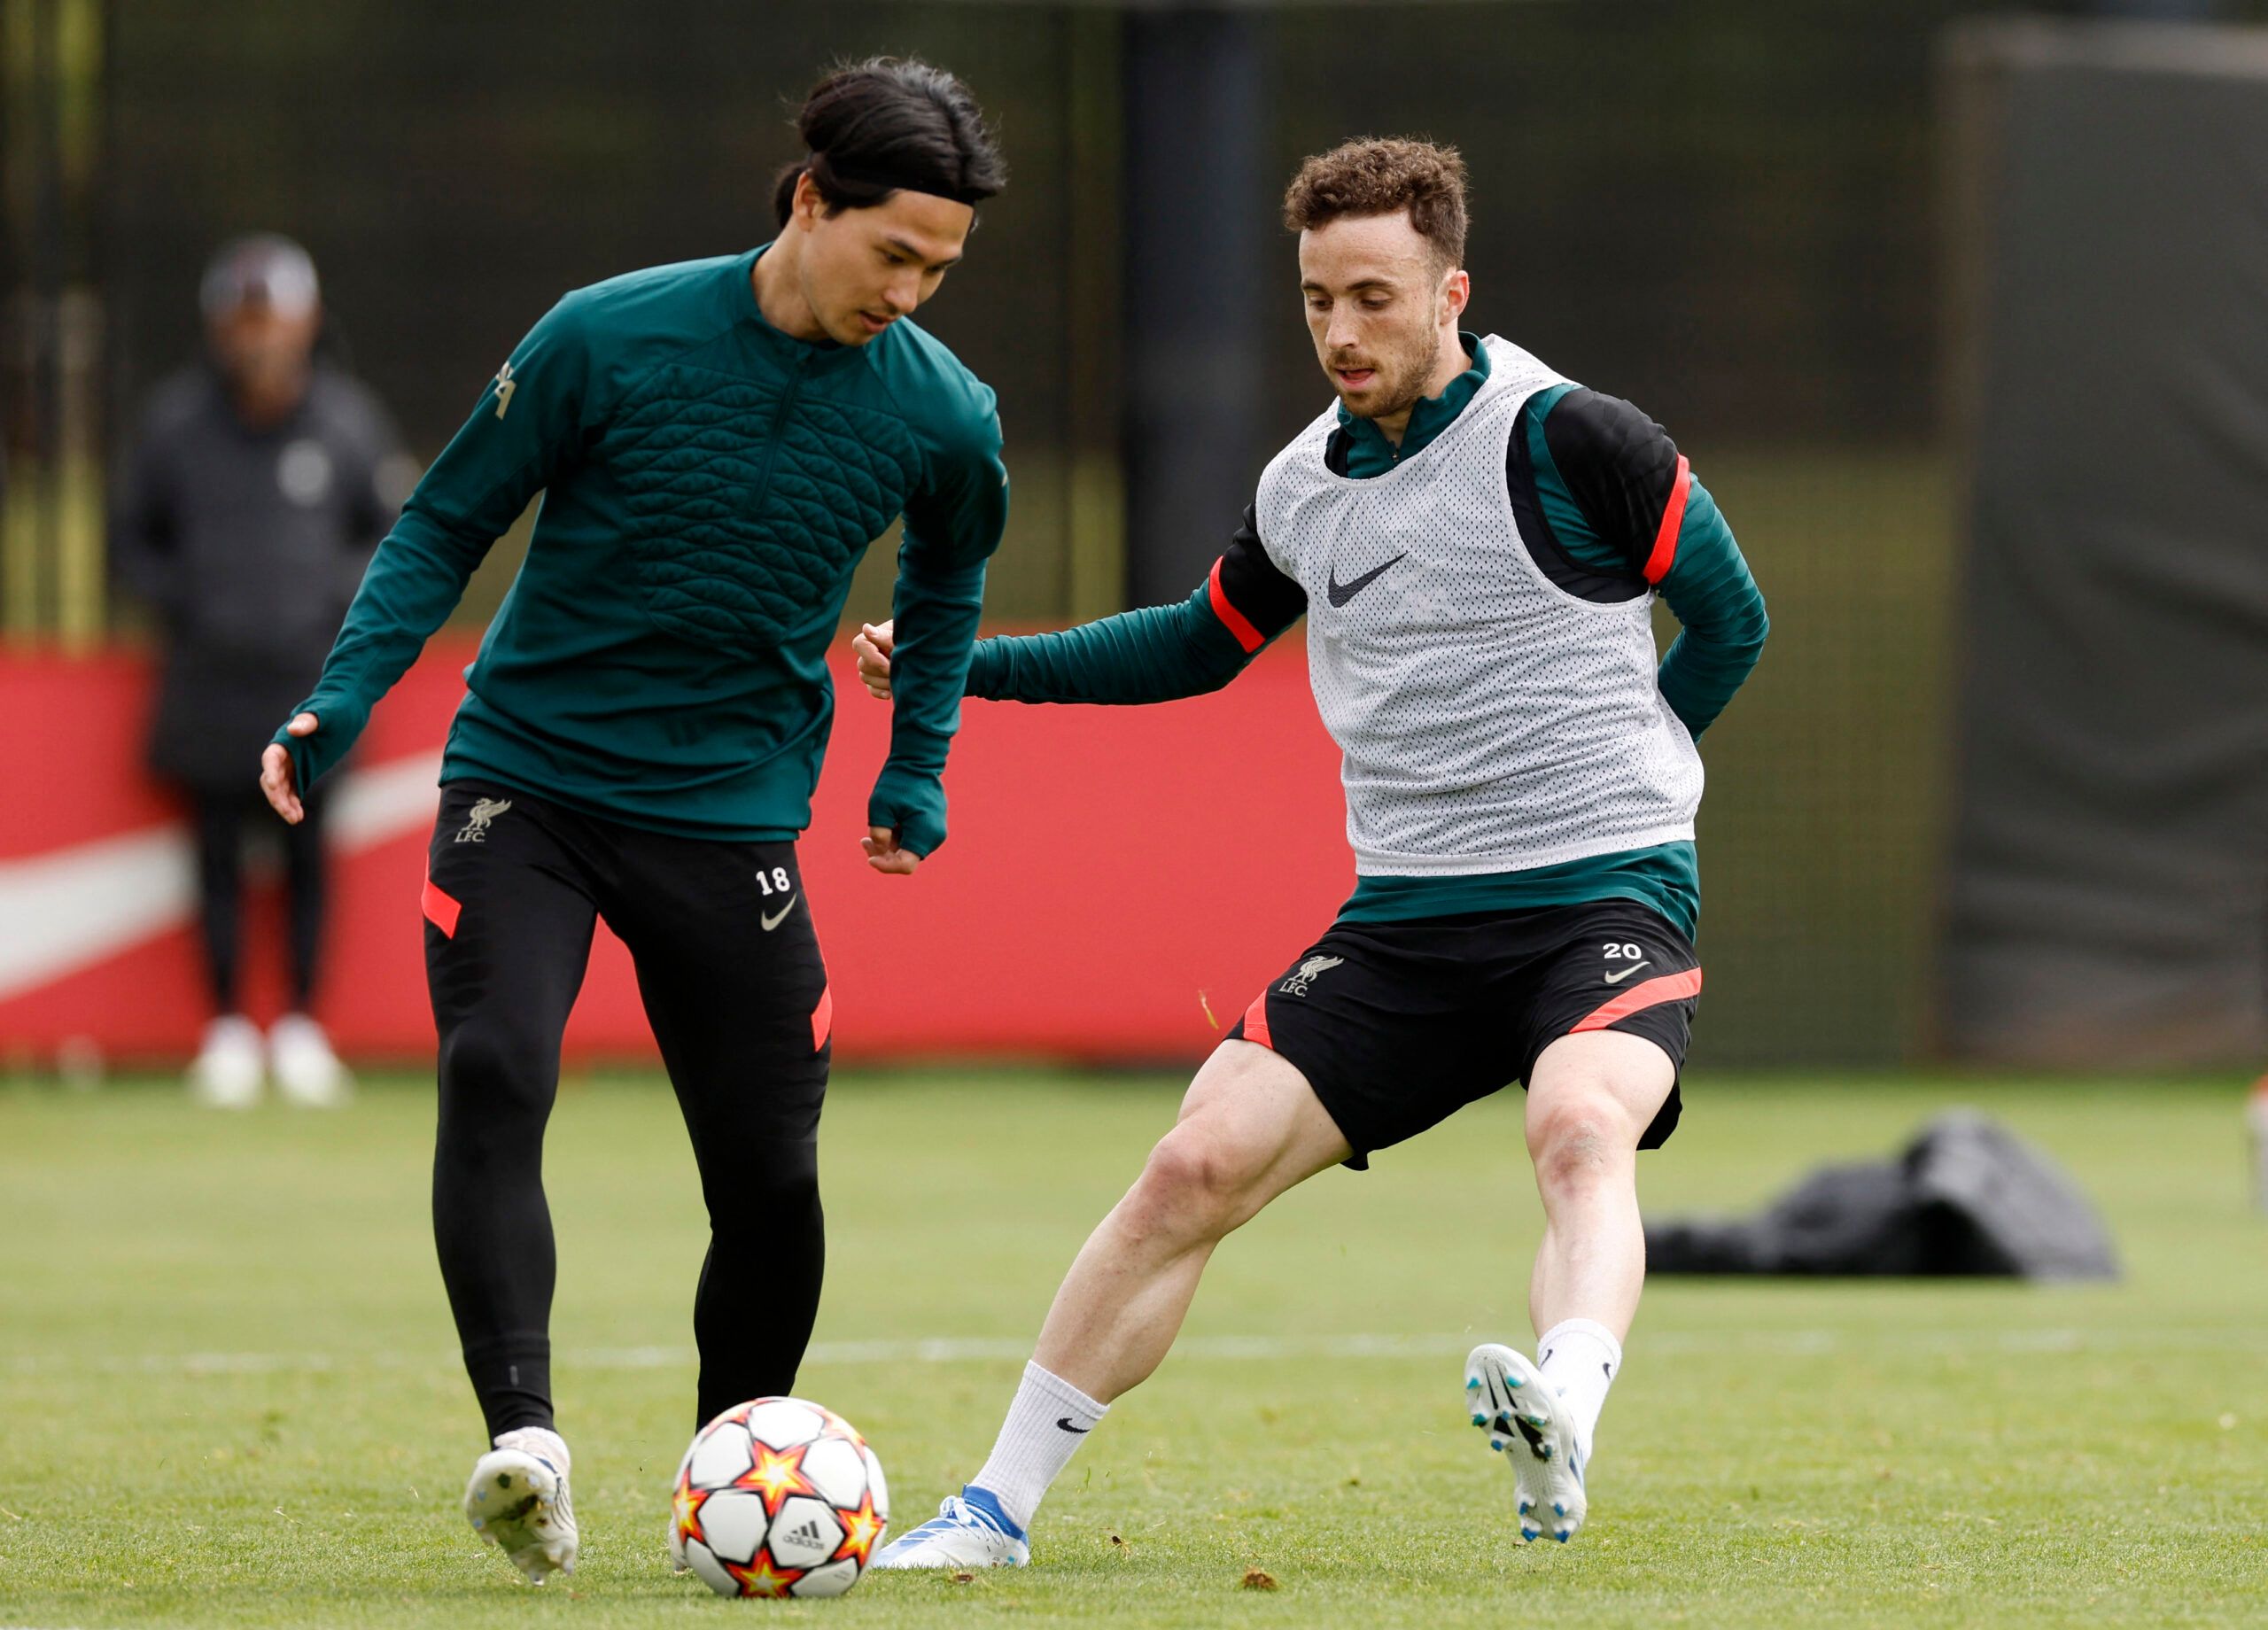 Soccer Football - Champions League - Final - Liverpool Media Day - AXA Training Centre, Liverpool, Britain - May 25, 2022 Liverpool's Takumi Minamino and Diogo Jota during training Action Images via Reuters/Jason Cairnduff